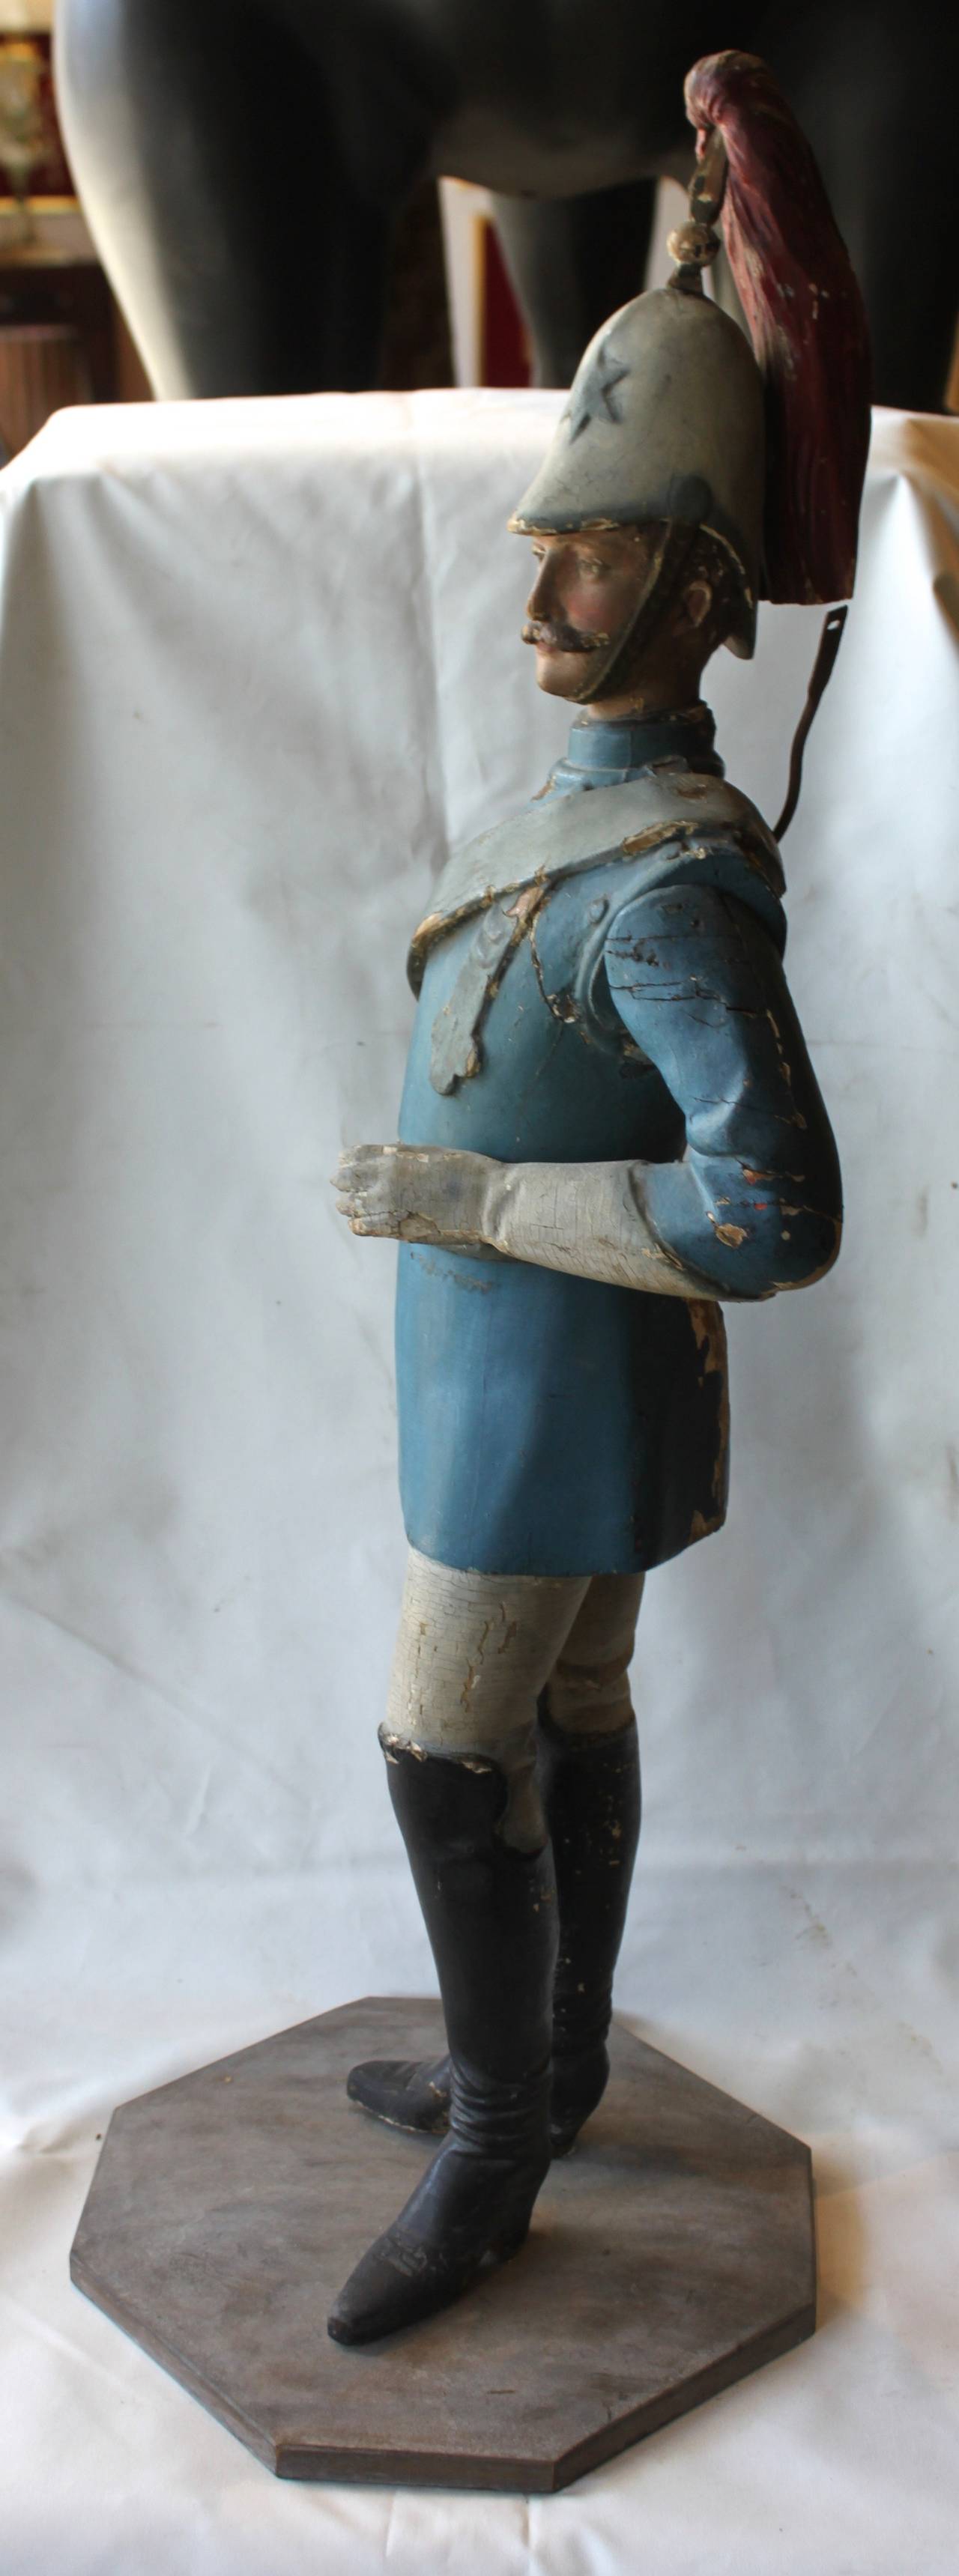 Polychrome carved wood European soldier figure,
circa 1825-1835
Original paint
Articulated arm
from carousel band organ.